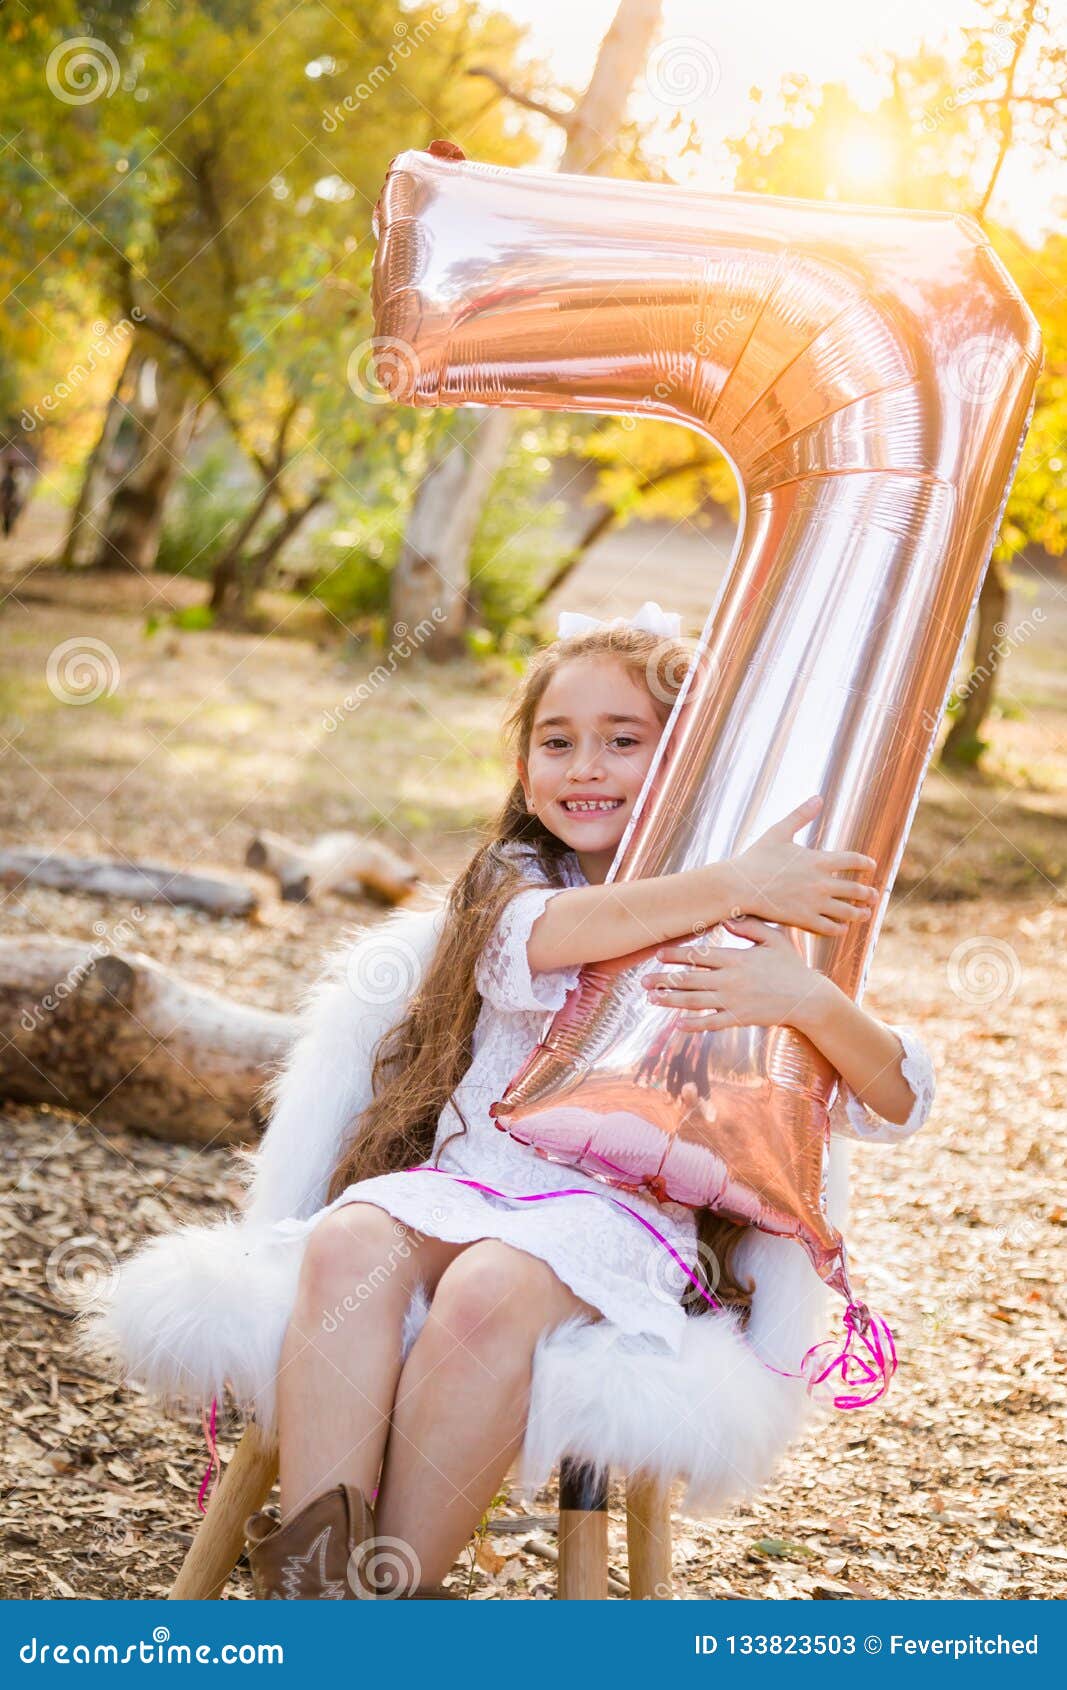 cute young girl playing with number seven mylar balloon outdoors